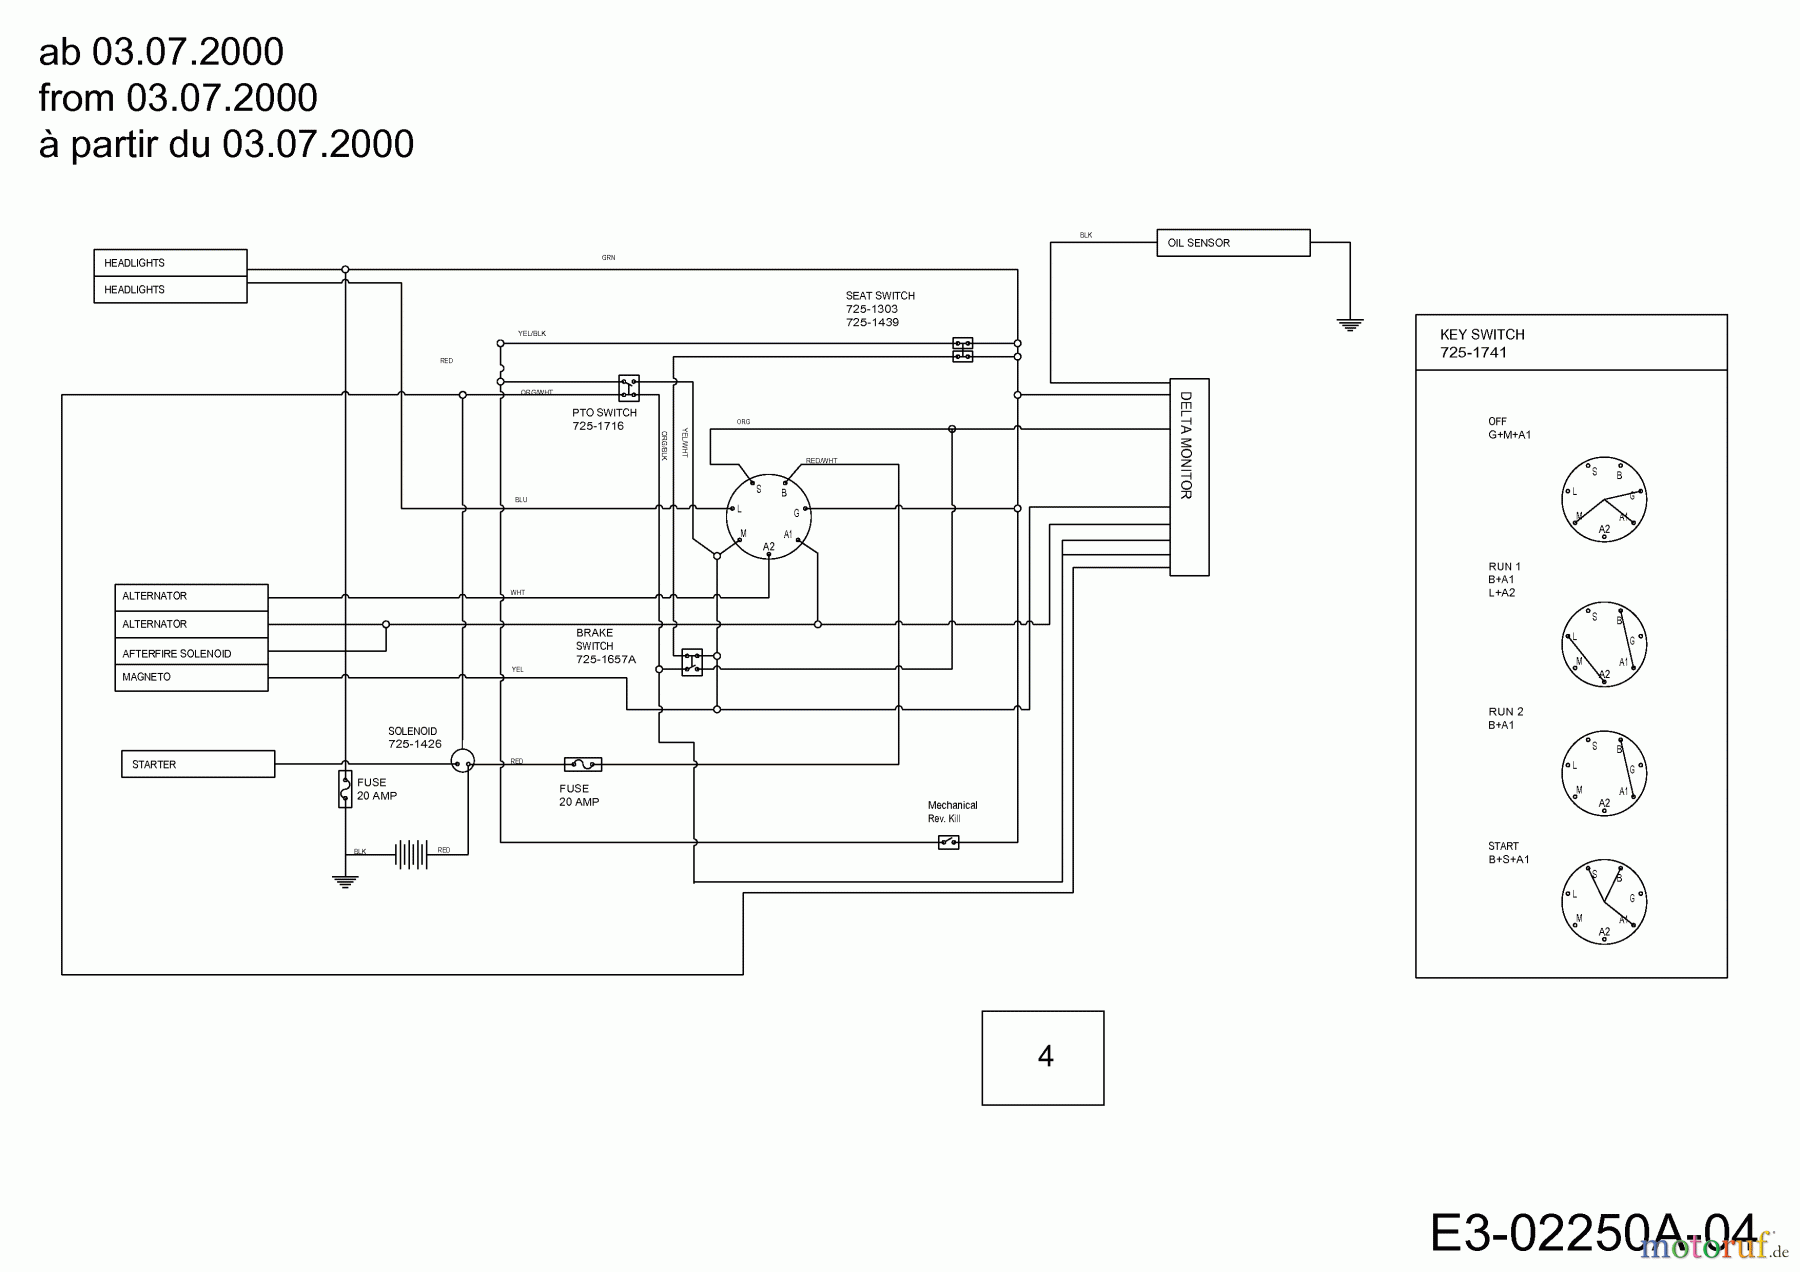  White Lawn tractors LT 180 13AT606H680  (2000) Wiring diagram from 03.07.2000